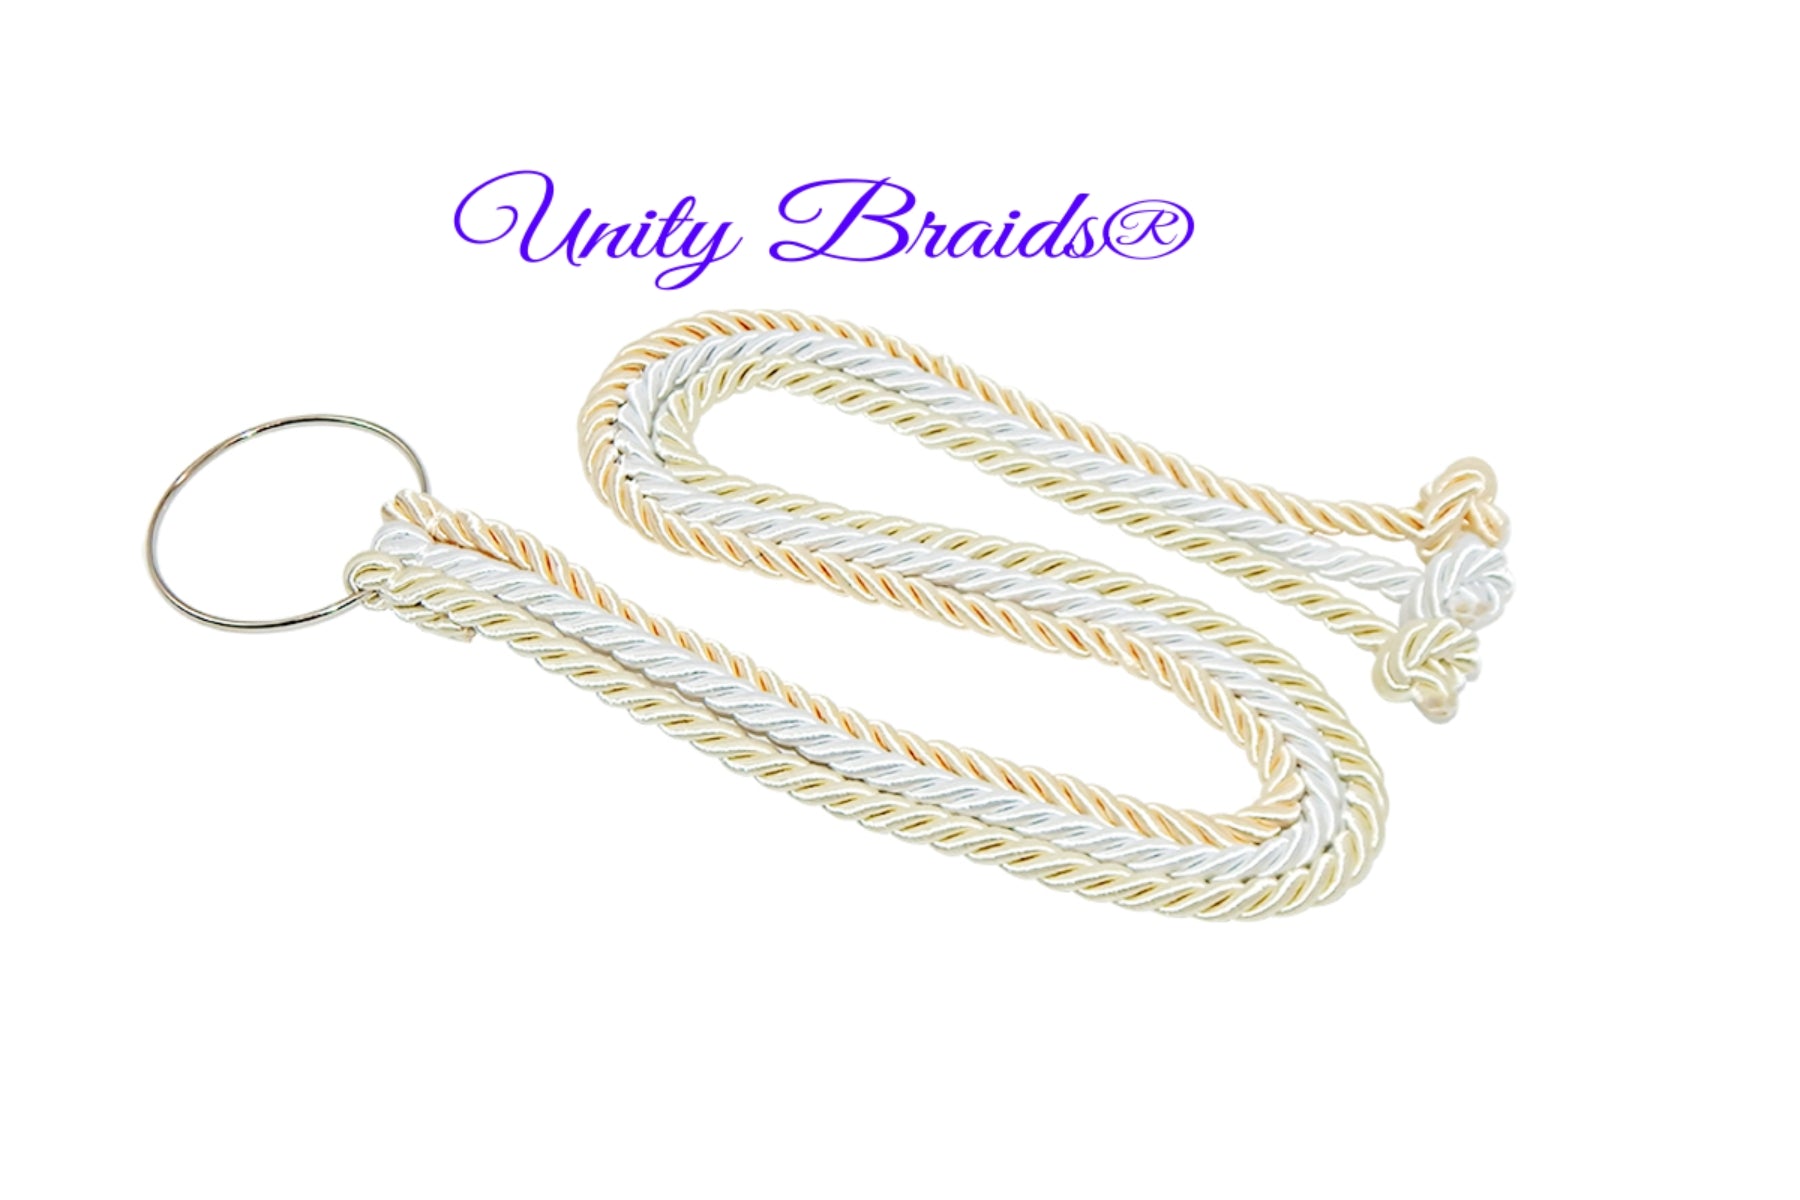 Cord of Three Strands, Unity Braids®, Tying The Knot, Wedding Gift, 3/8" Thick cords